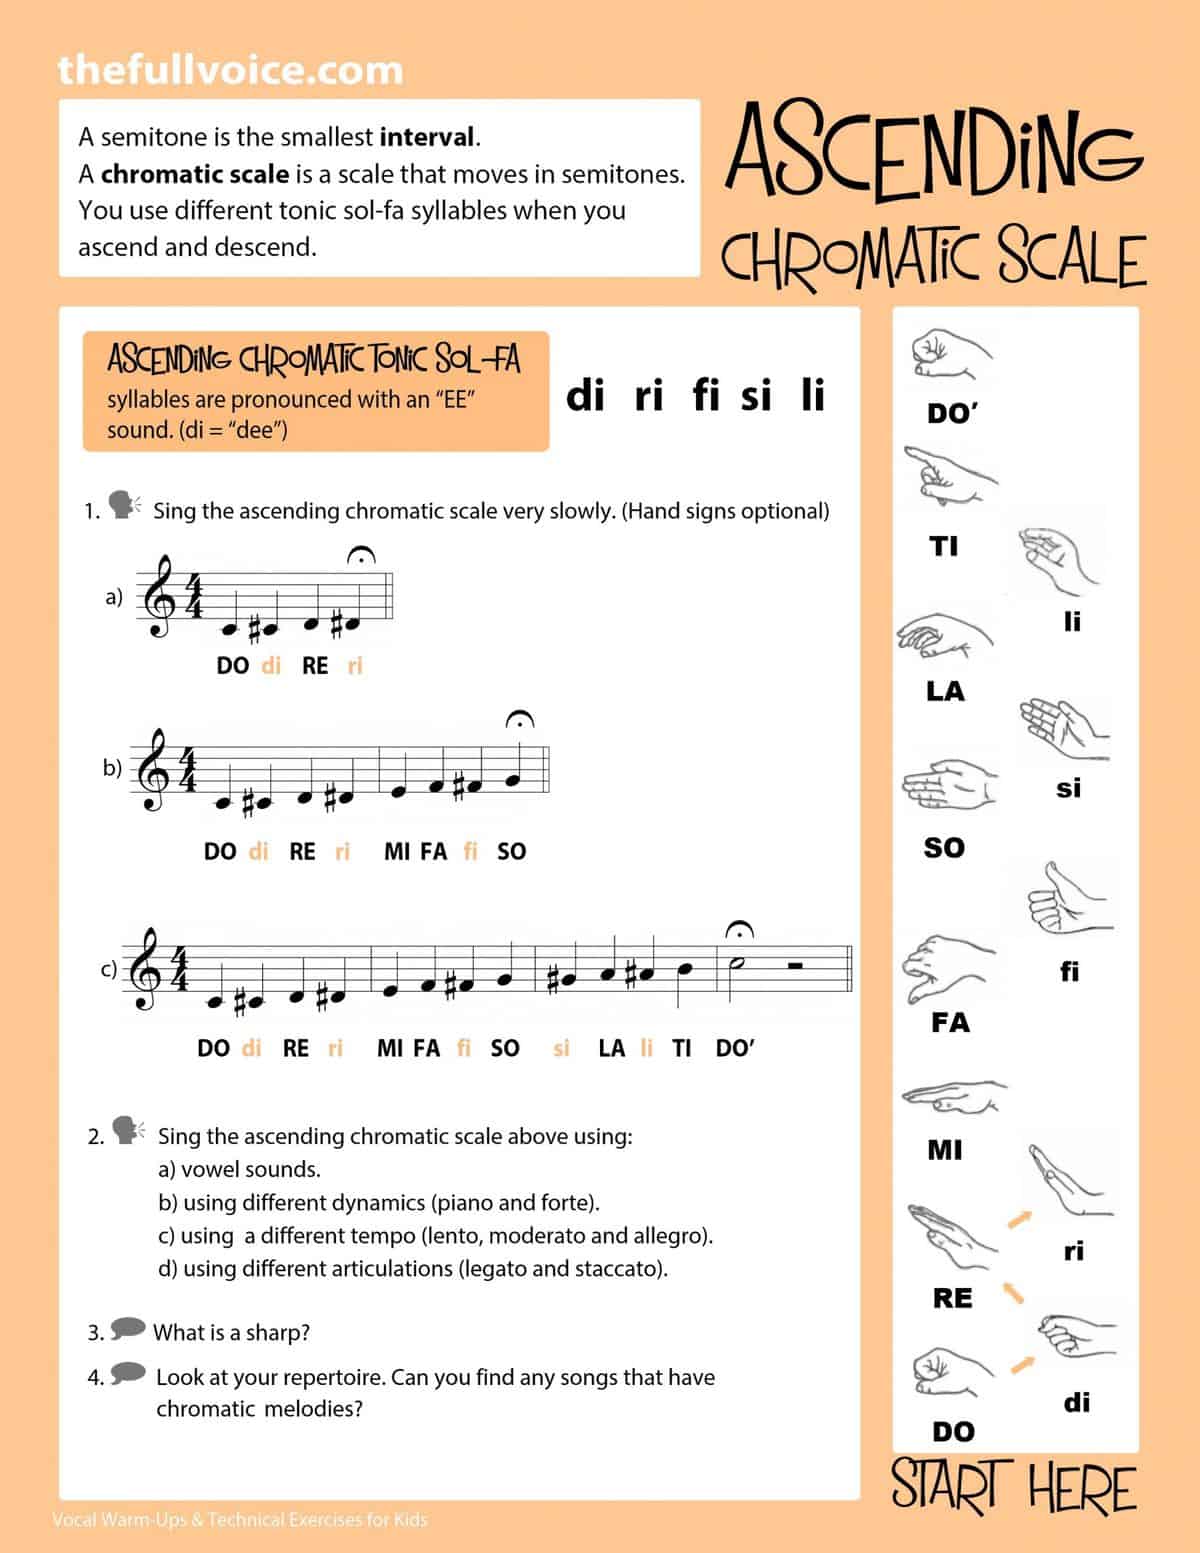 Vocal Warm-Ups and Technical Exercises for Kids!  (PDF)